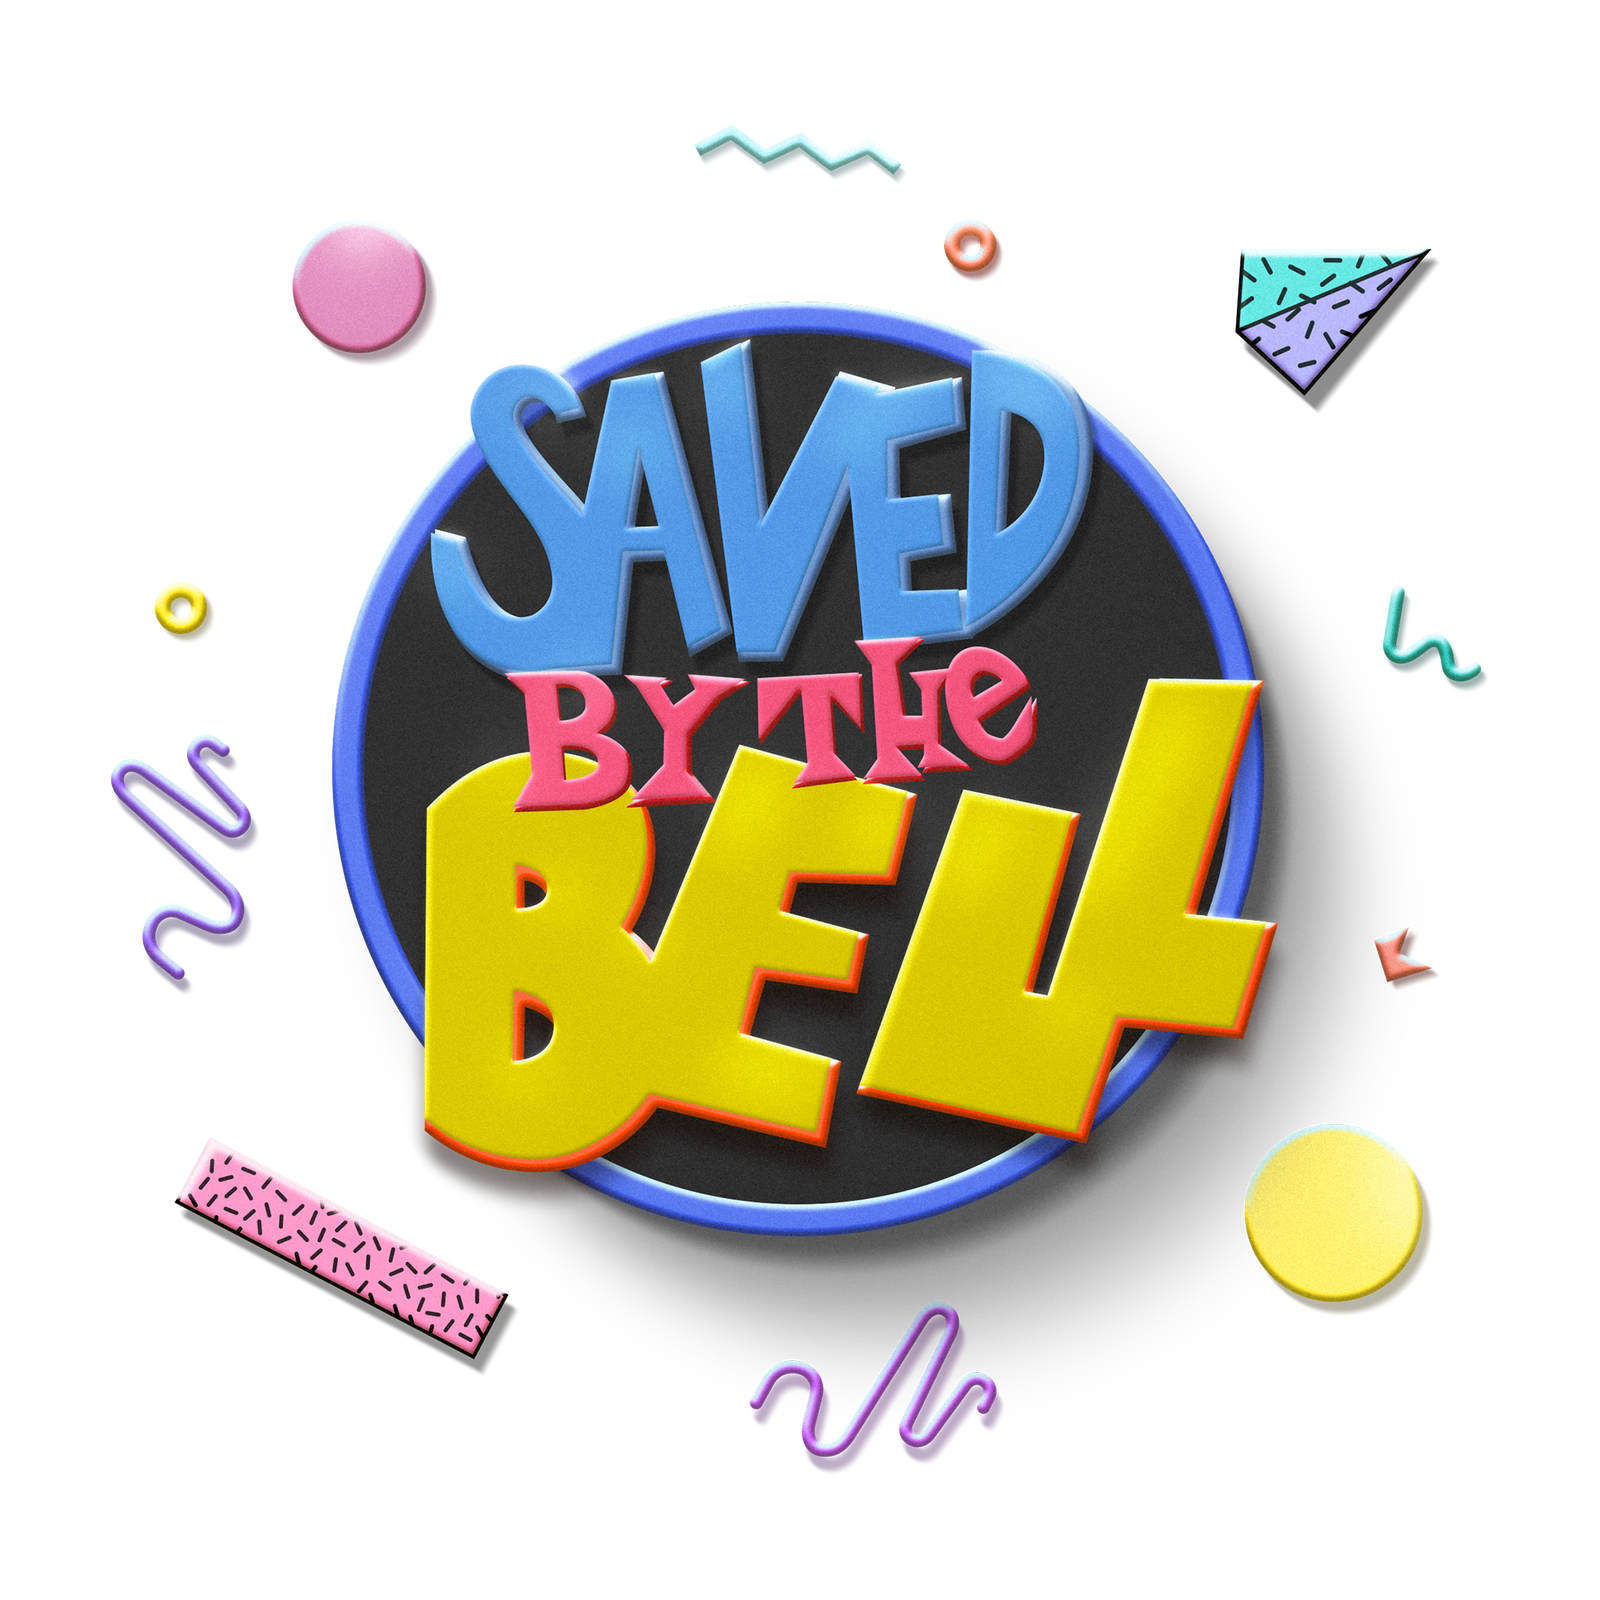 Saved by the Bell logo.